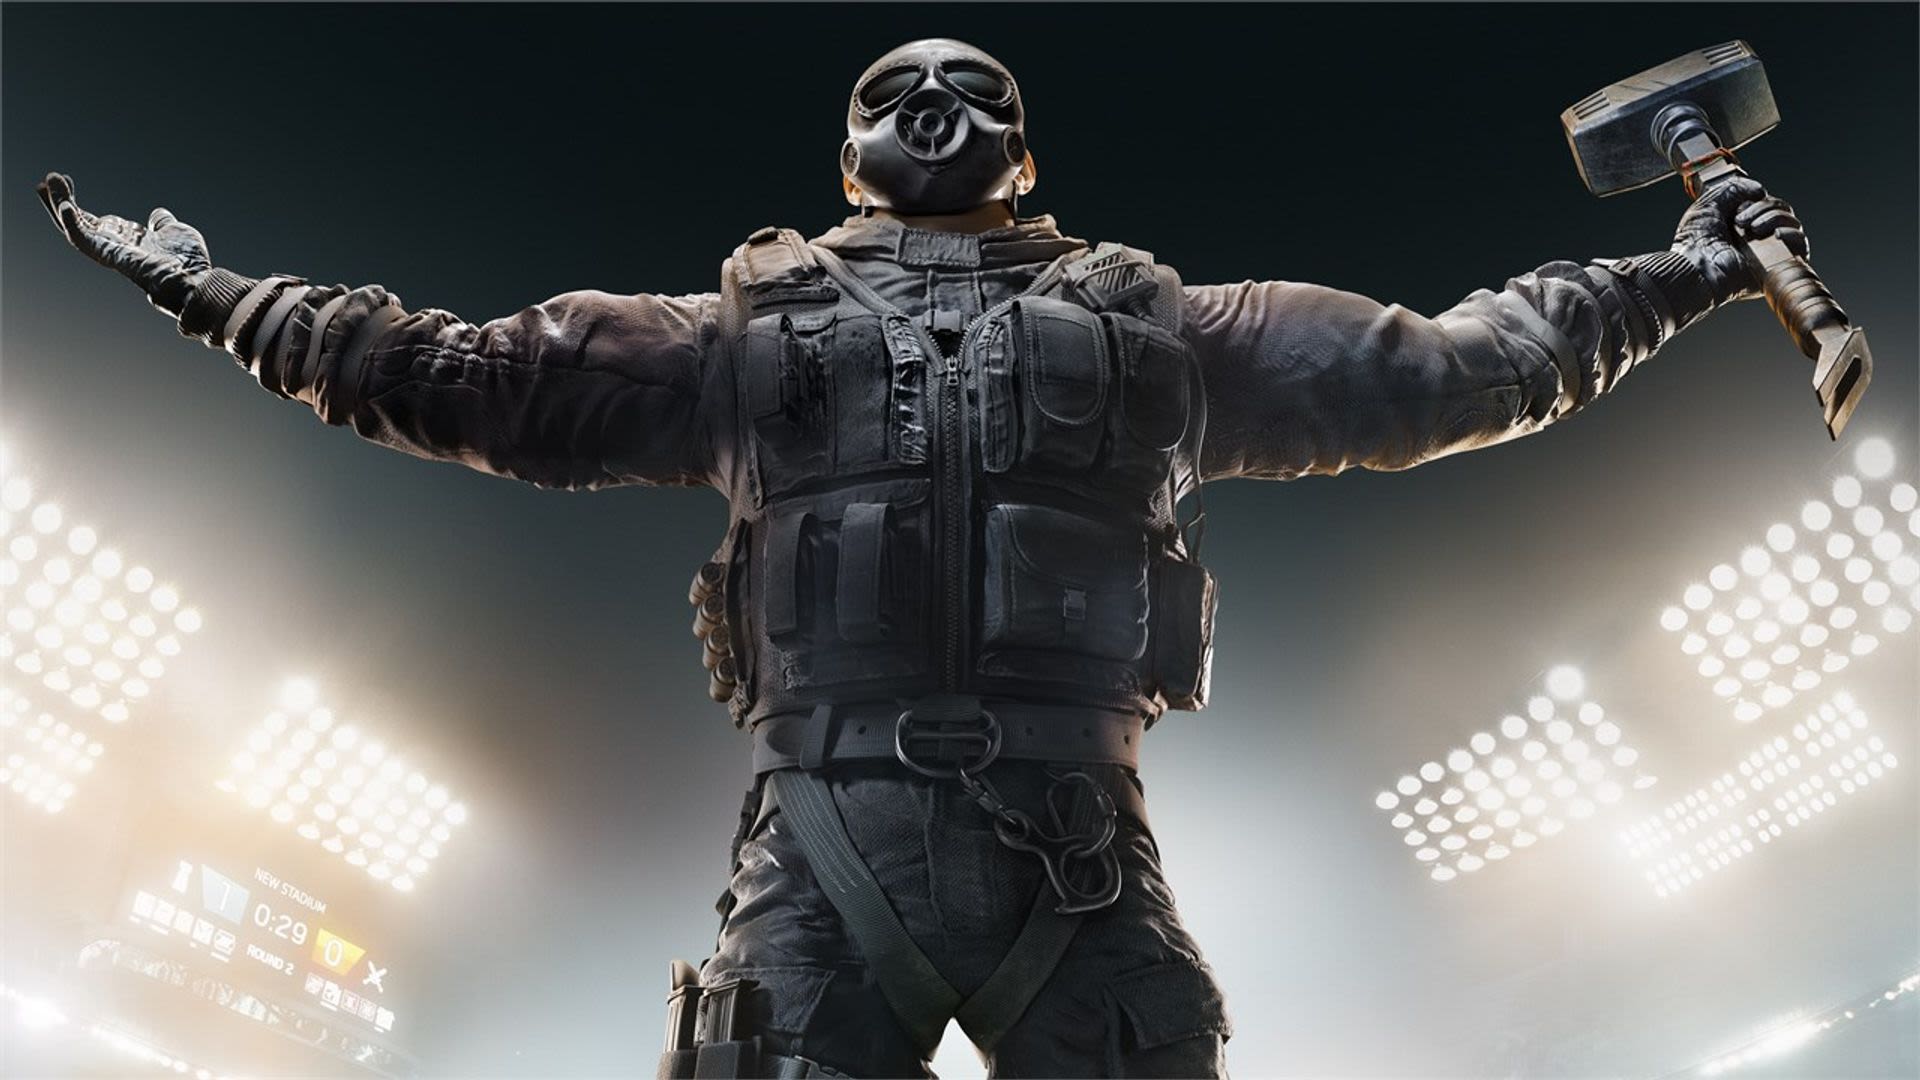 Rainbow Six Siege's new monthly subscription announcement didn't go down well with players